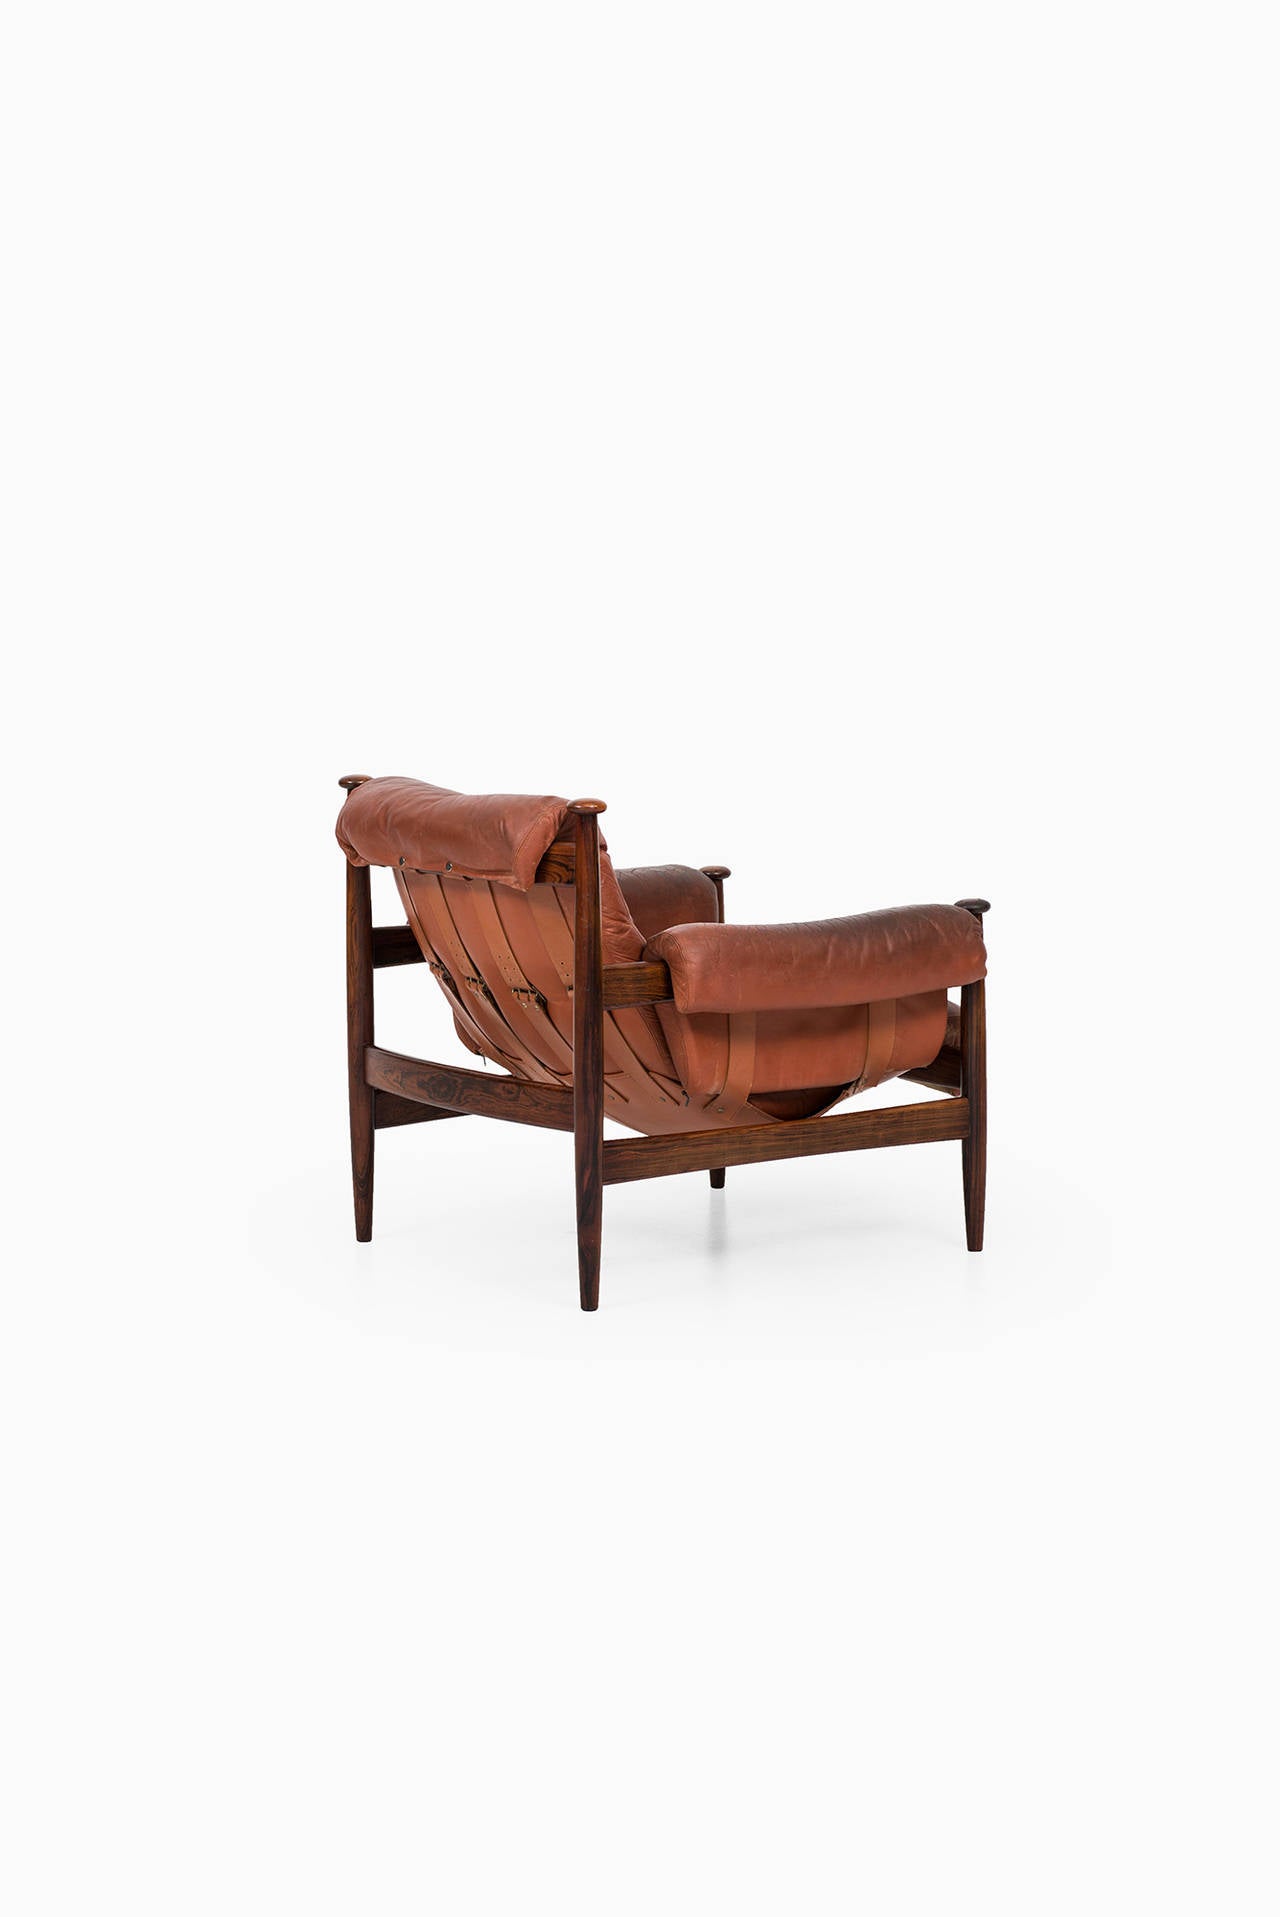 Rare safari chair in rosewood and red leather. Produced by Ire Möbler in Skillingaryd, Sweden